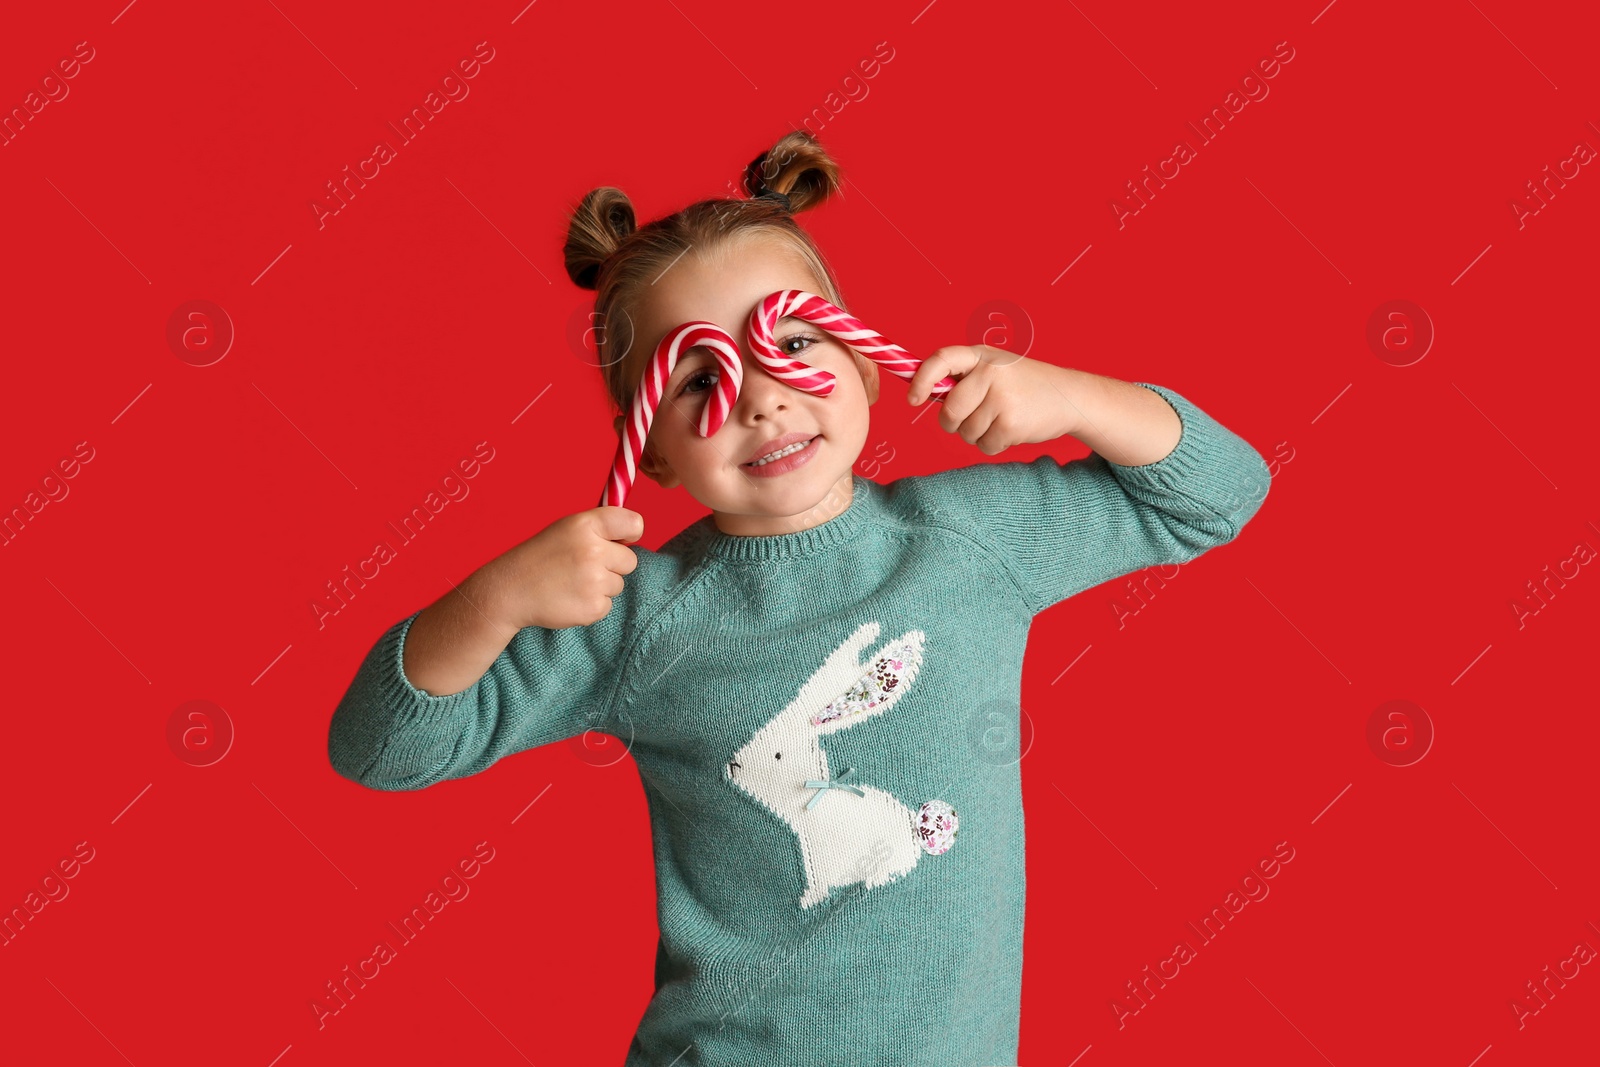 Photo of Cute little girl in knitted sweater holding candy canes on red background. Celebrating Christmas